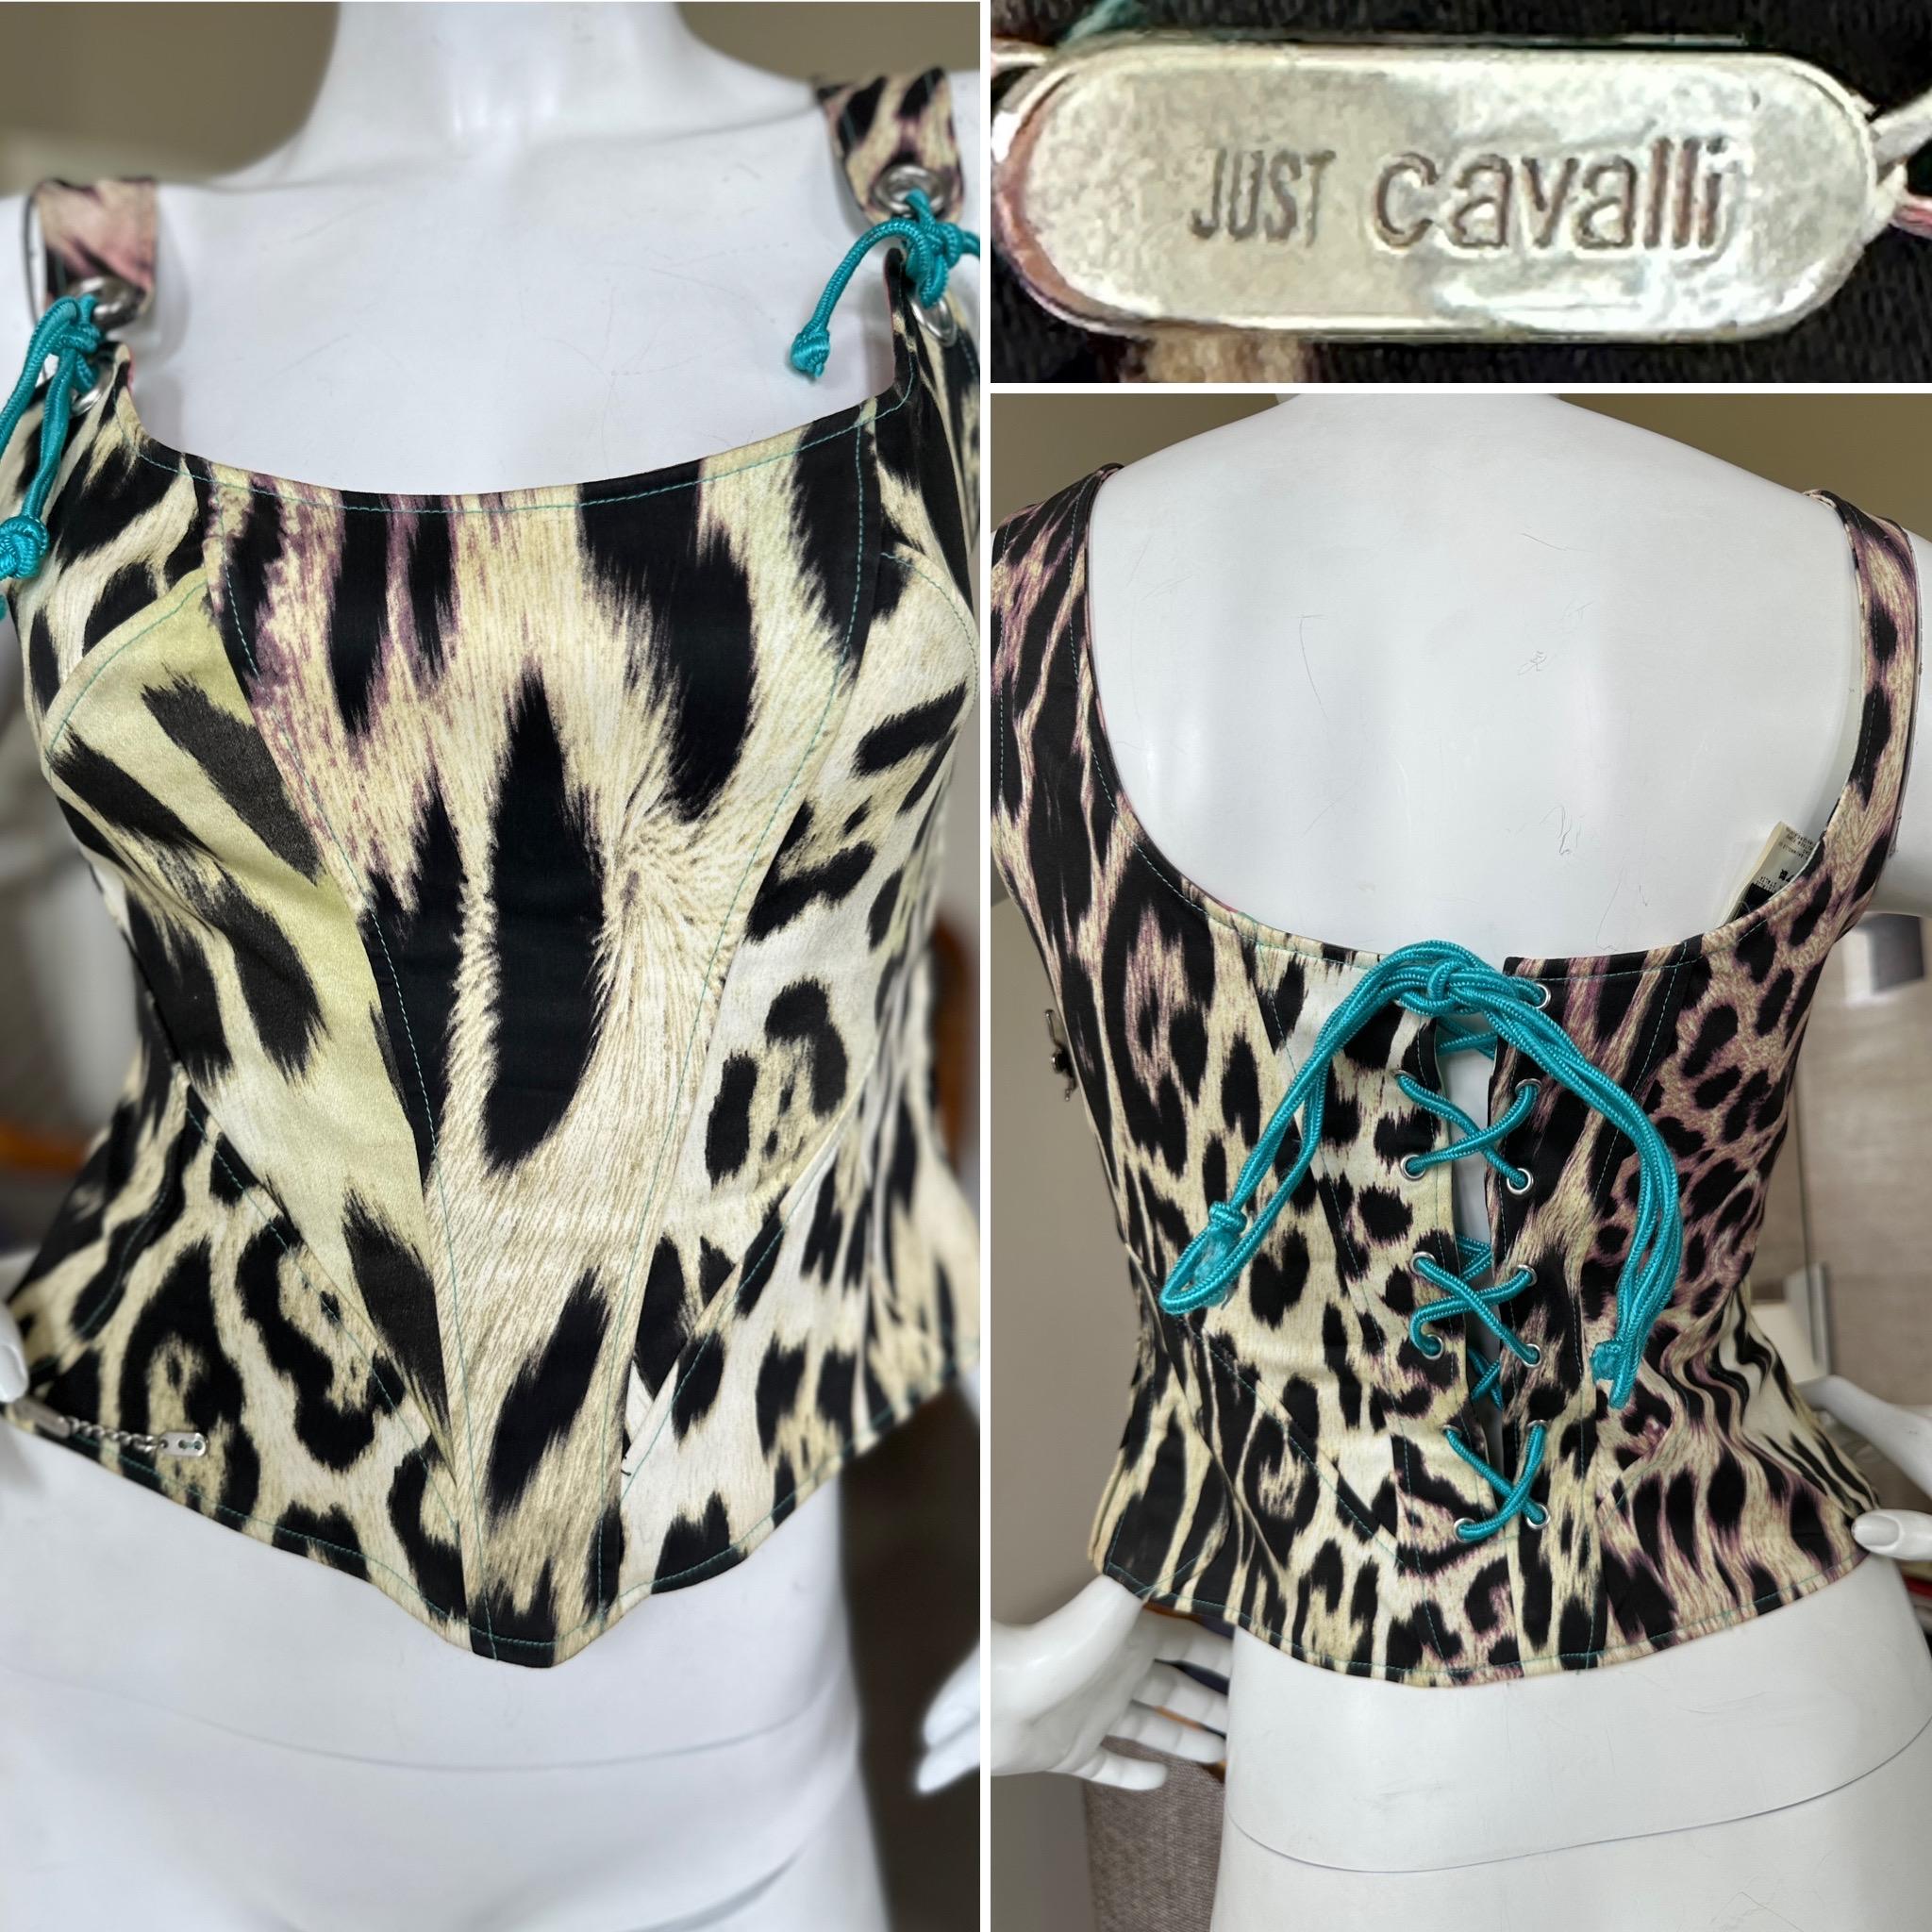 Roberto Cavalli for Just Cavalli Zebra Print Corset with Lace Up Details 
Wonderful piece , front and back.
Size 40
Bust 34'
Waist 28